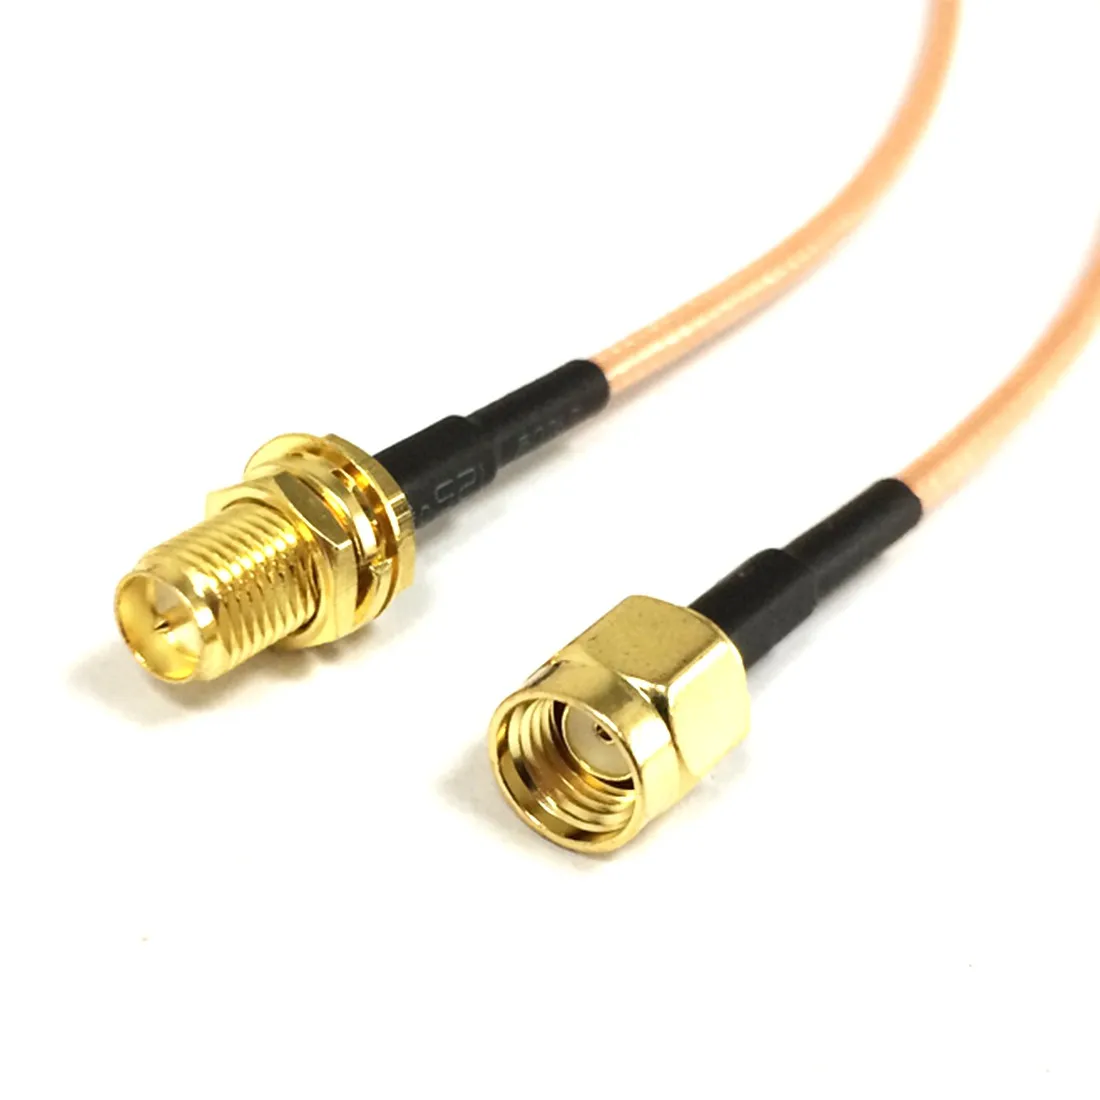 

1PC New RG316 Coaxial Cable RP-SMA Male Plug To Reverse Polarity Female Jack Pigtail 15CM Wire Connector For Wifi Router